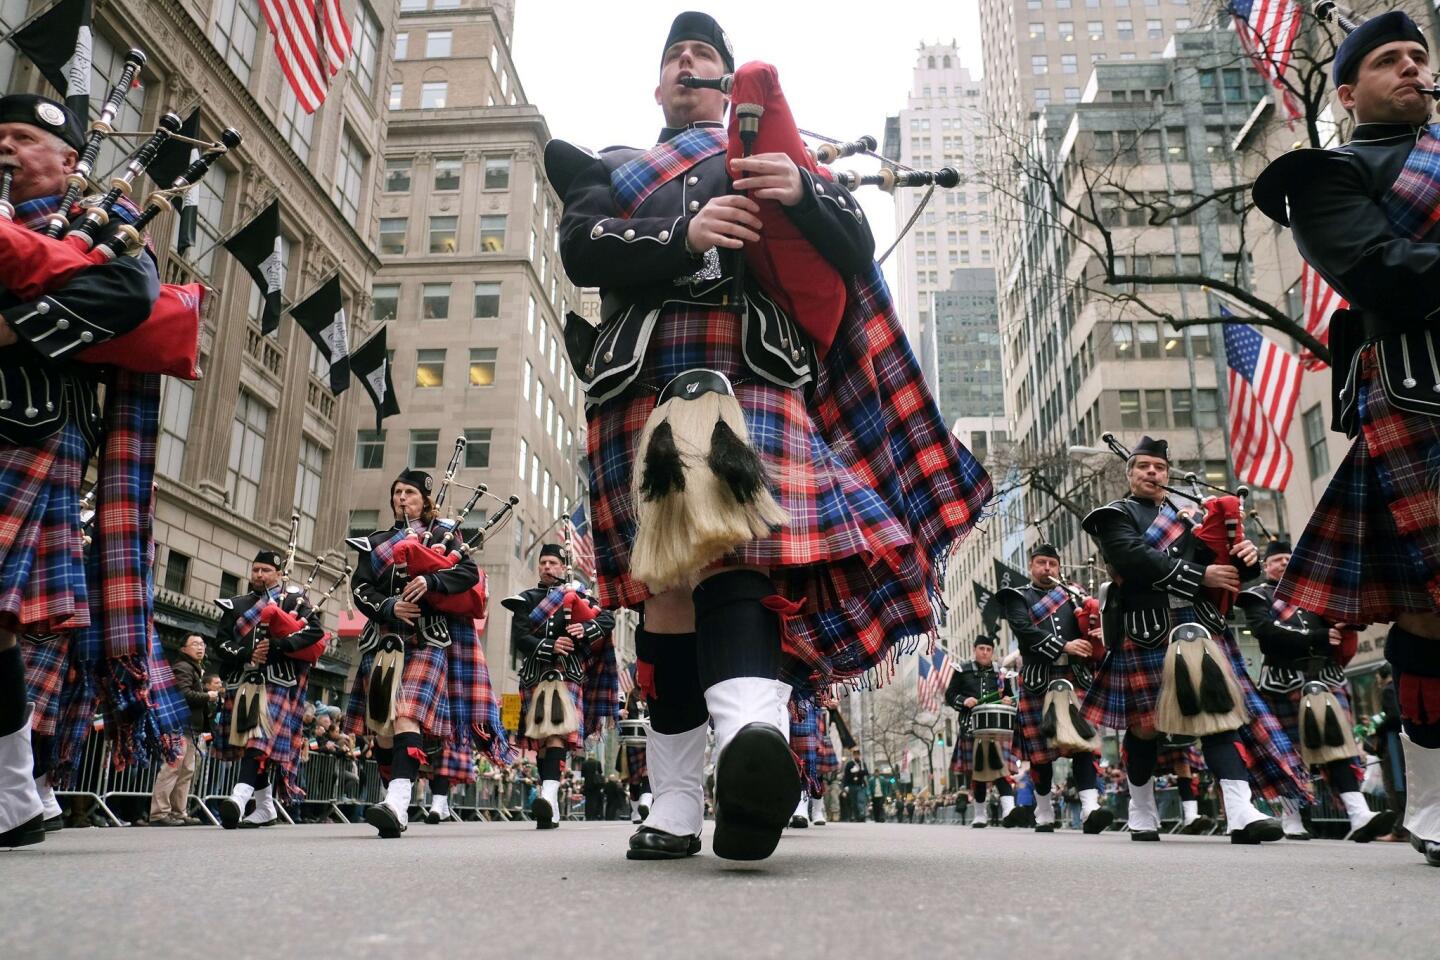 Bagpipers march during the St Patrick's Day parade in New York.